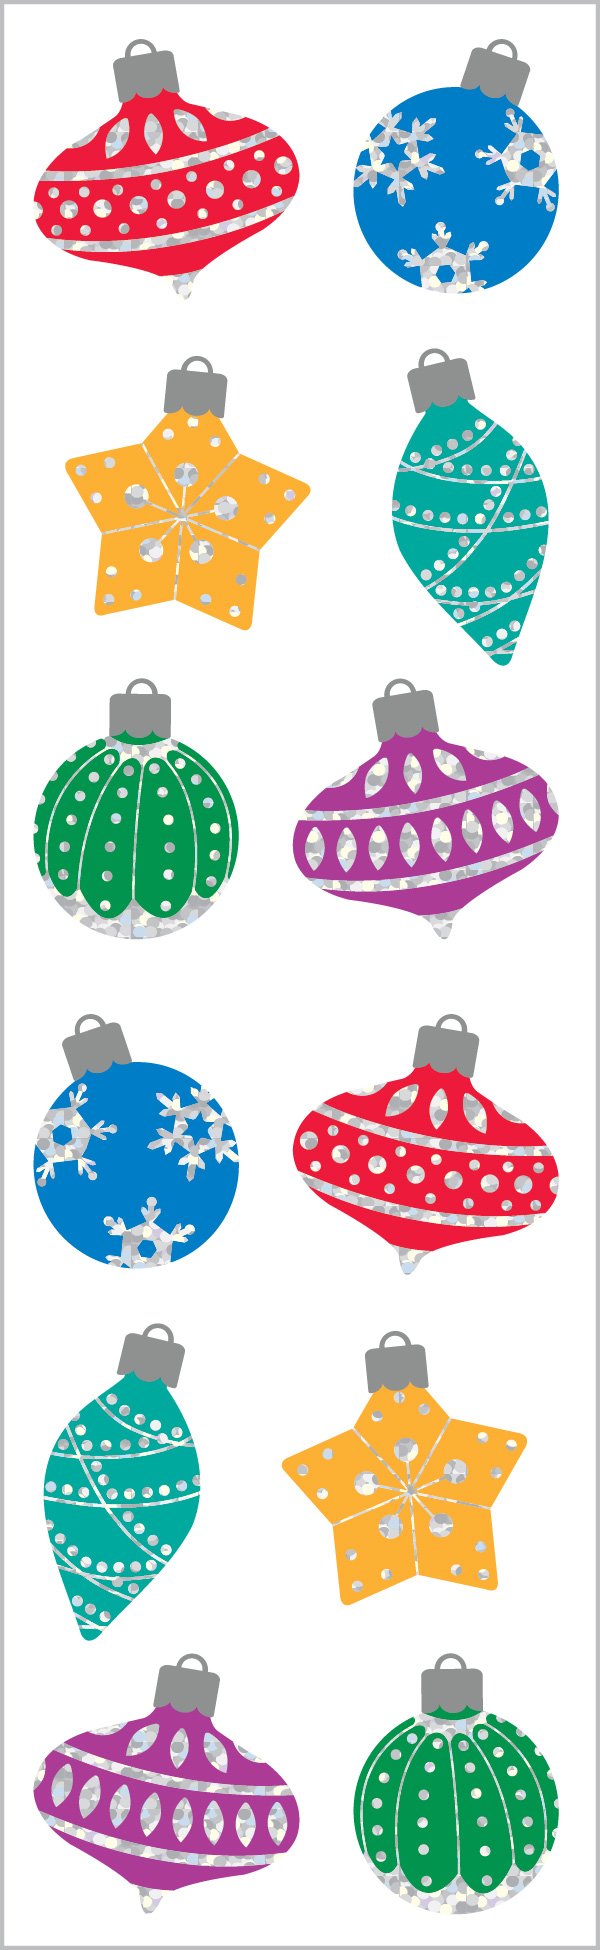 Shiny Ornaments, Reflections Stickers